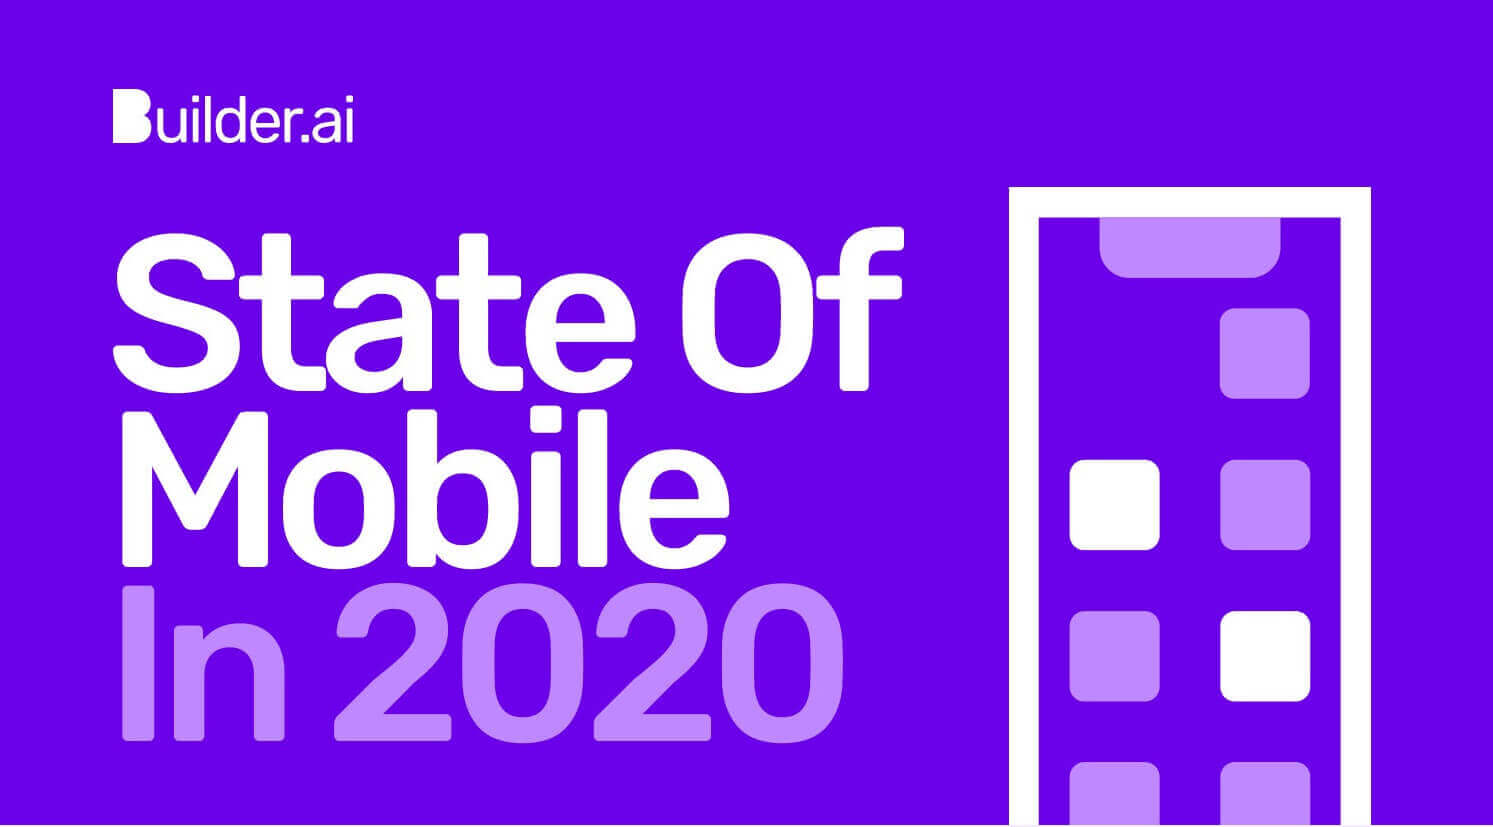 Top Smartphone Usage Statistics for Mobile Marketers in 2020